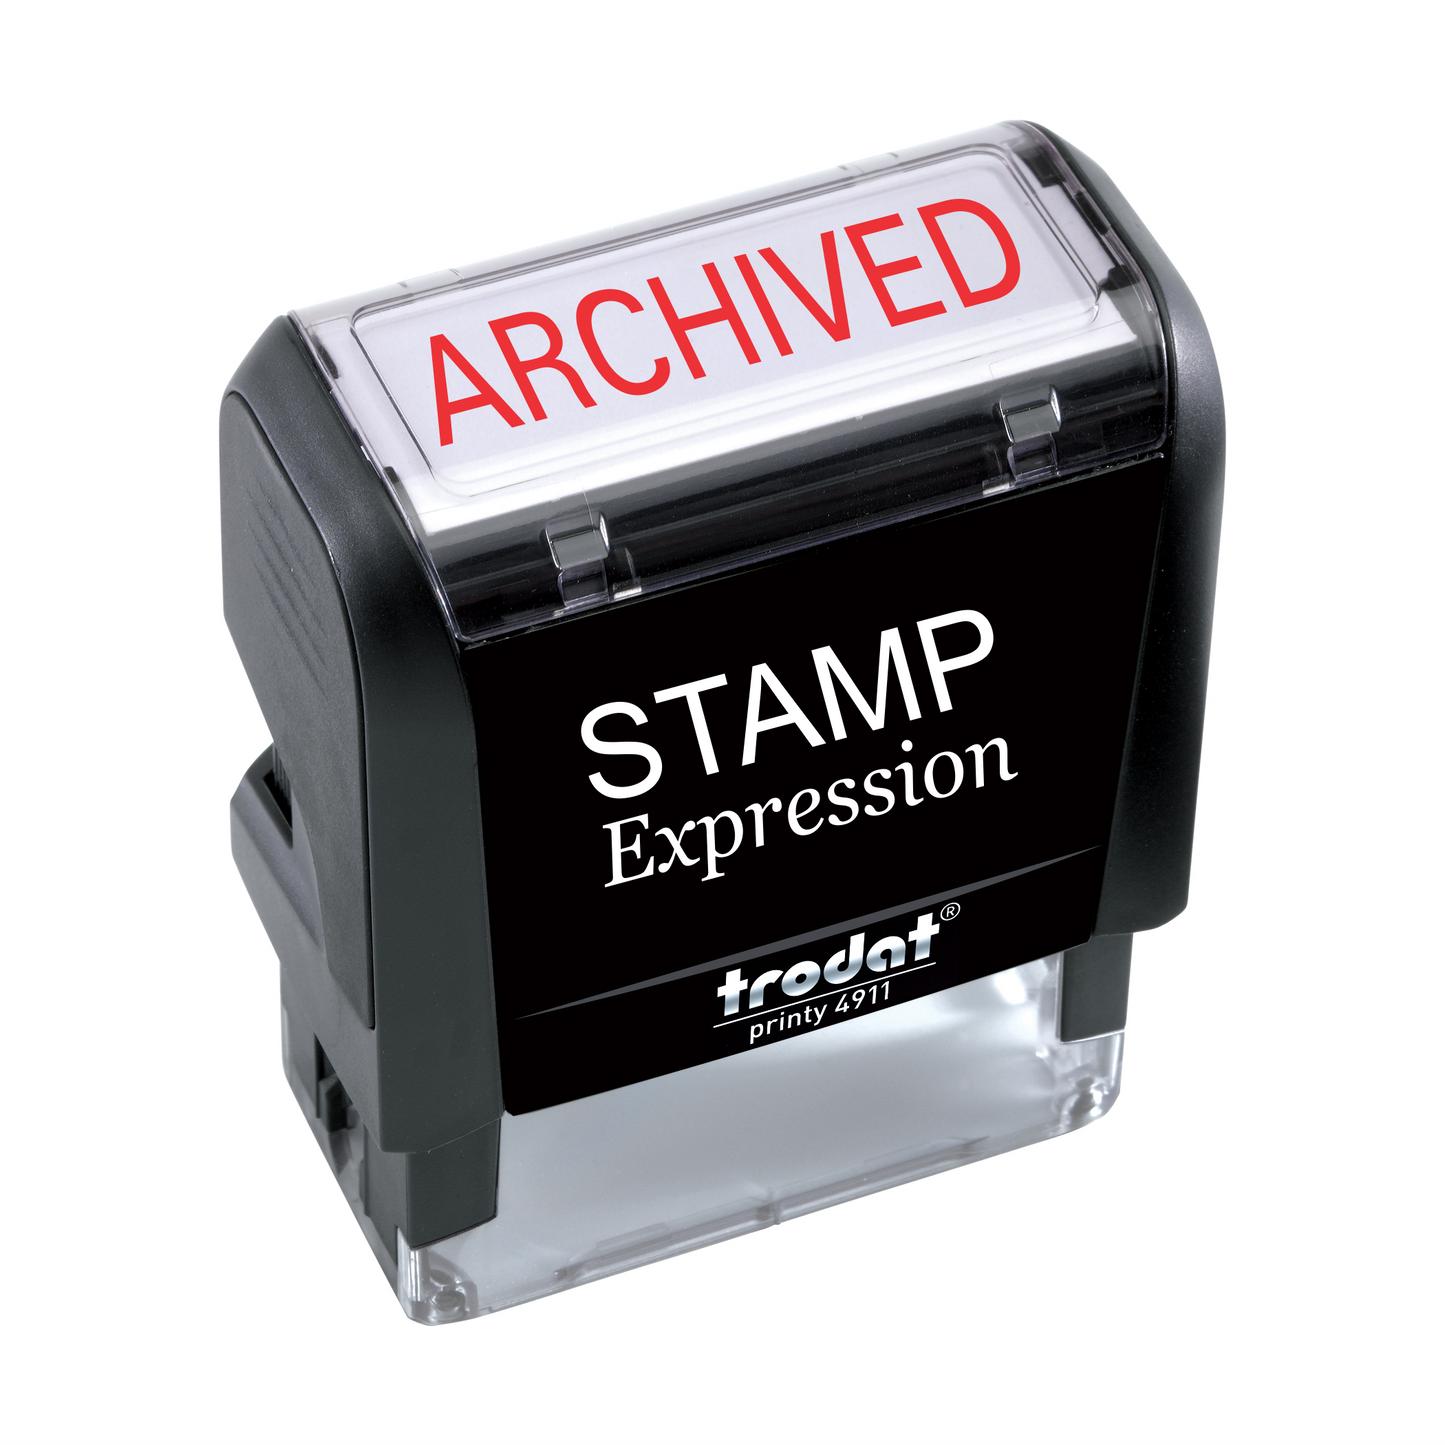 Capitalized ARCHIVED Office Self Inking Rubber Stamp - (SH-5234)